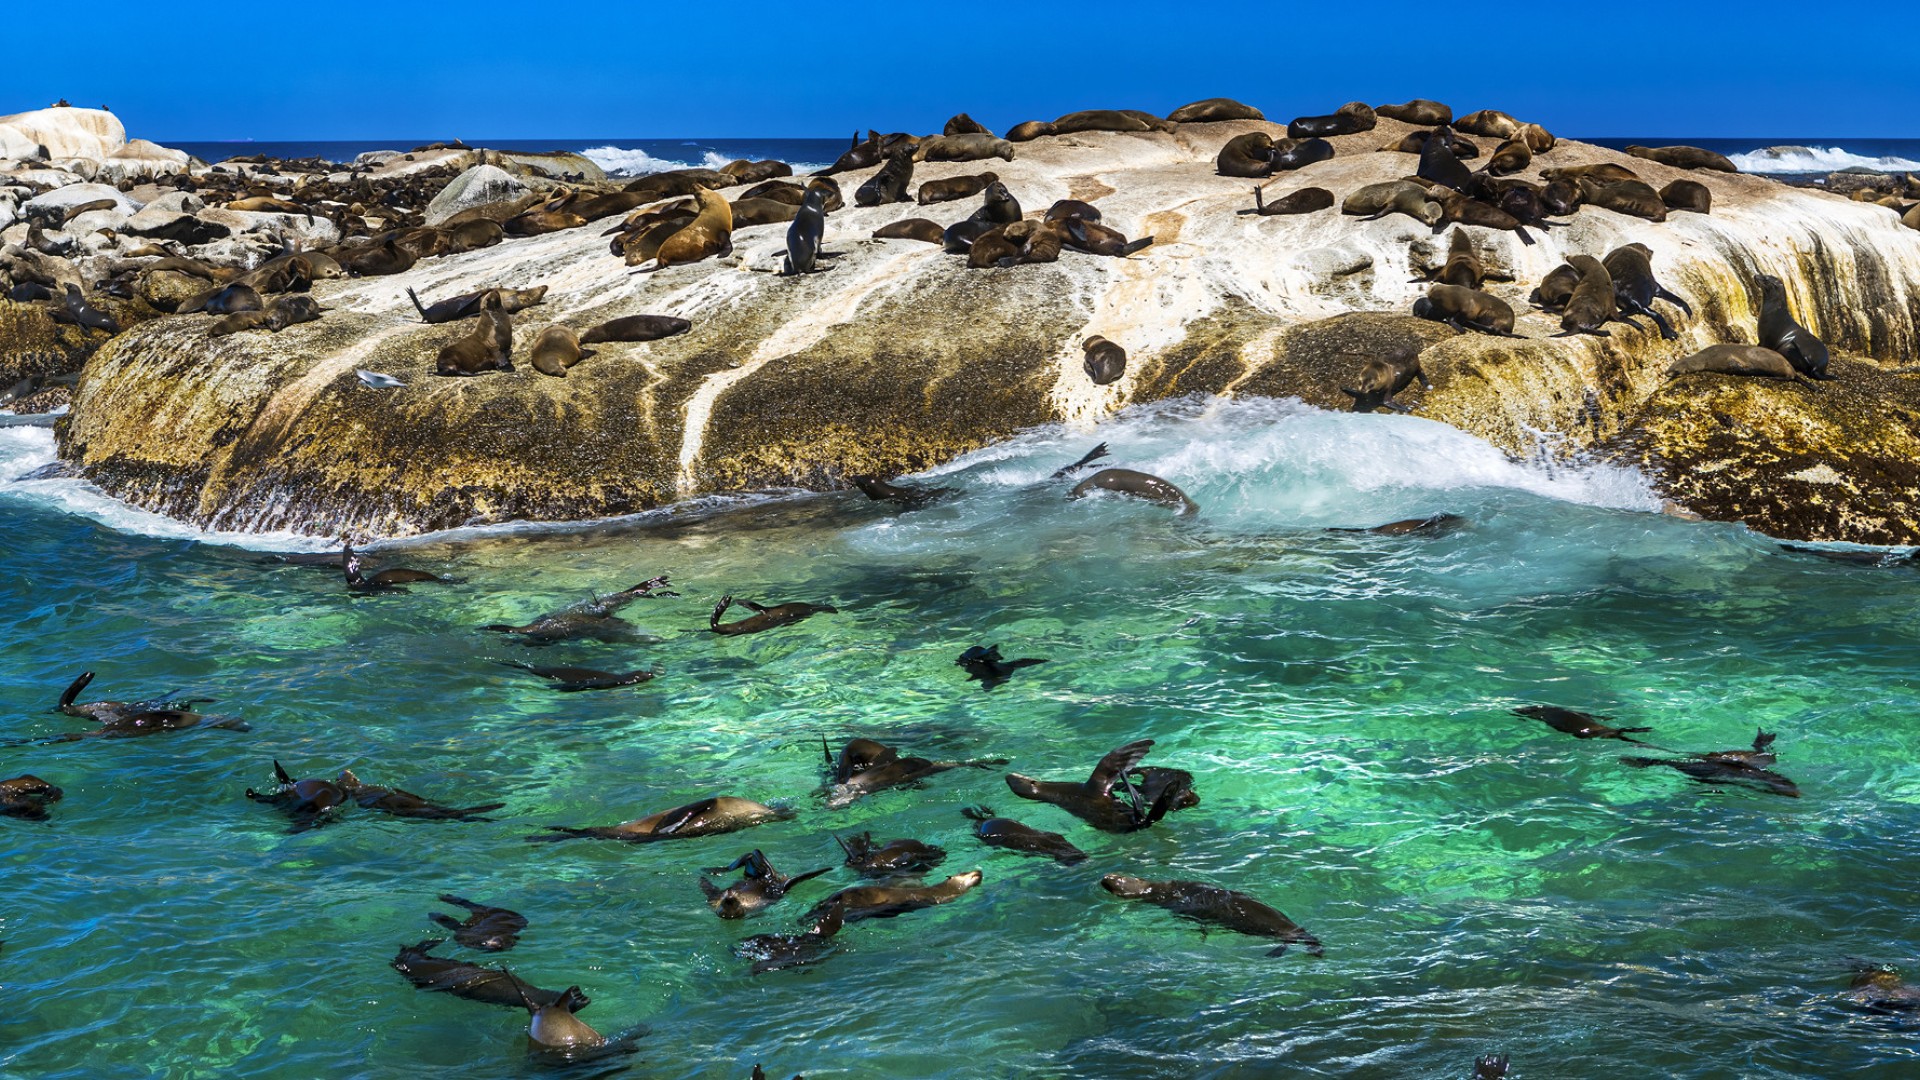 A group of sea lions and penguins swimming in the ocean off the shore of Capetown